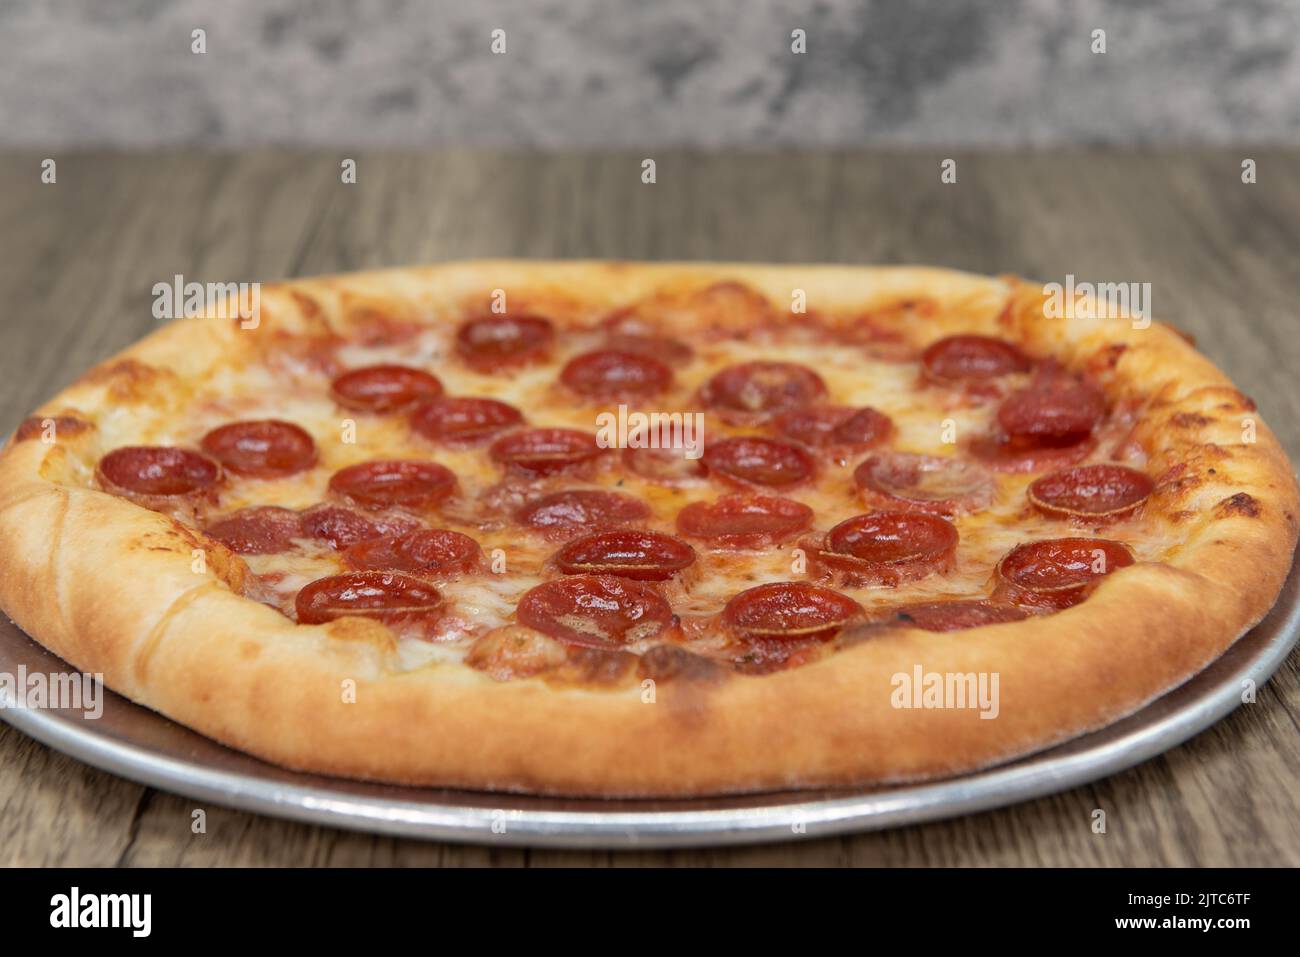 Hot from the oven is a crispy crust Italian baked pepperoni pizza that is ready to eat. Stock Photo